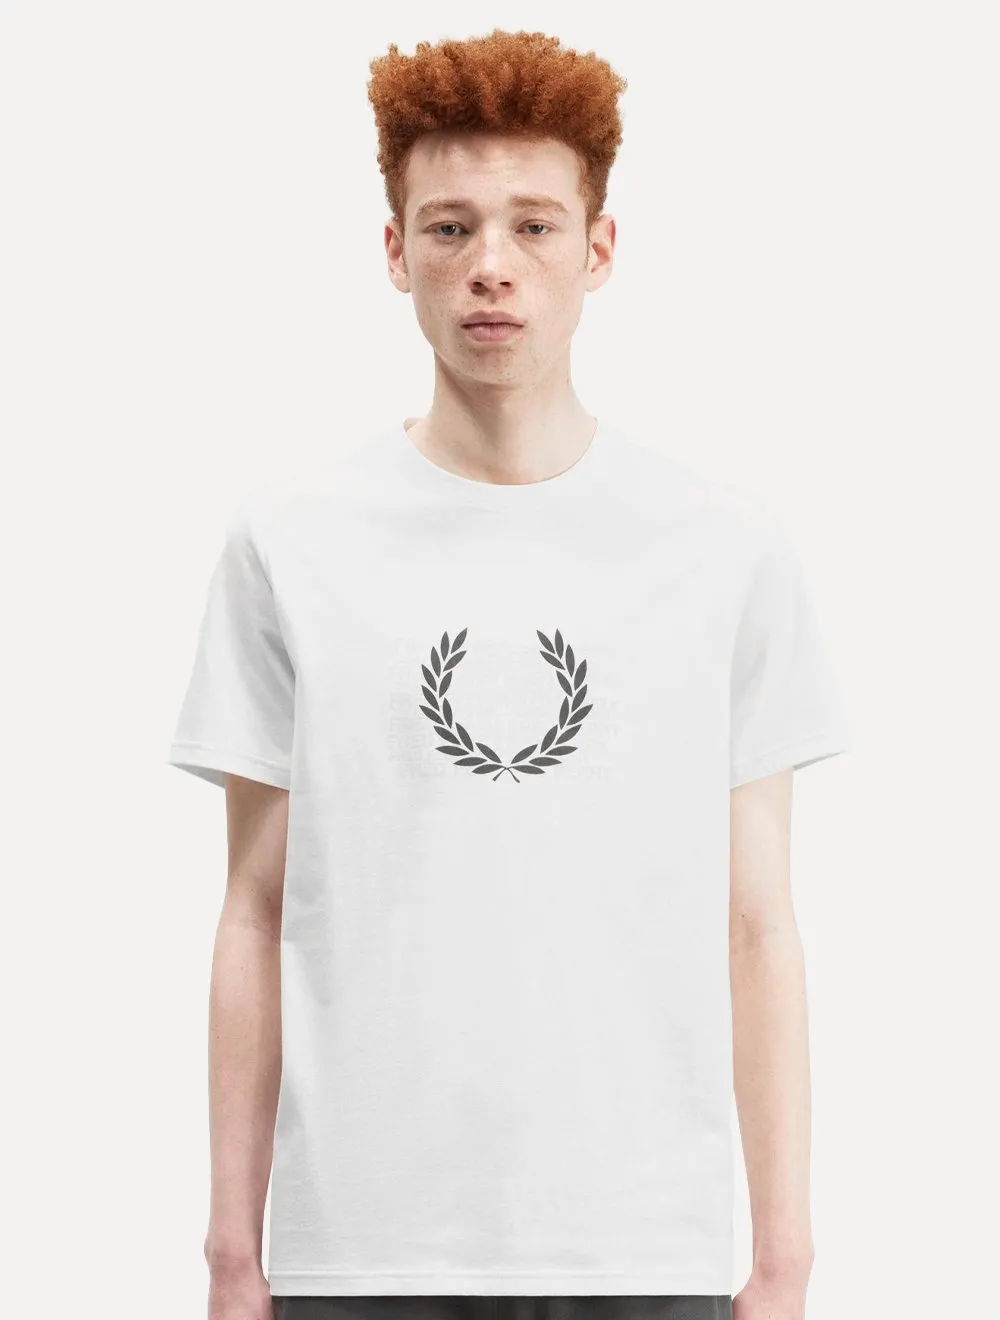 Camiseta Fred Perry Masculina Regular Graphic Mess Branca